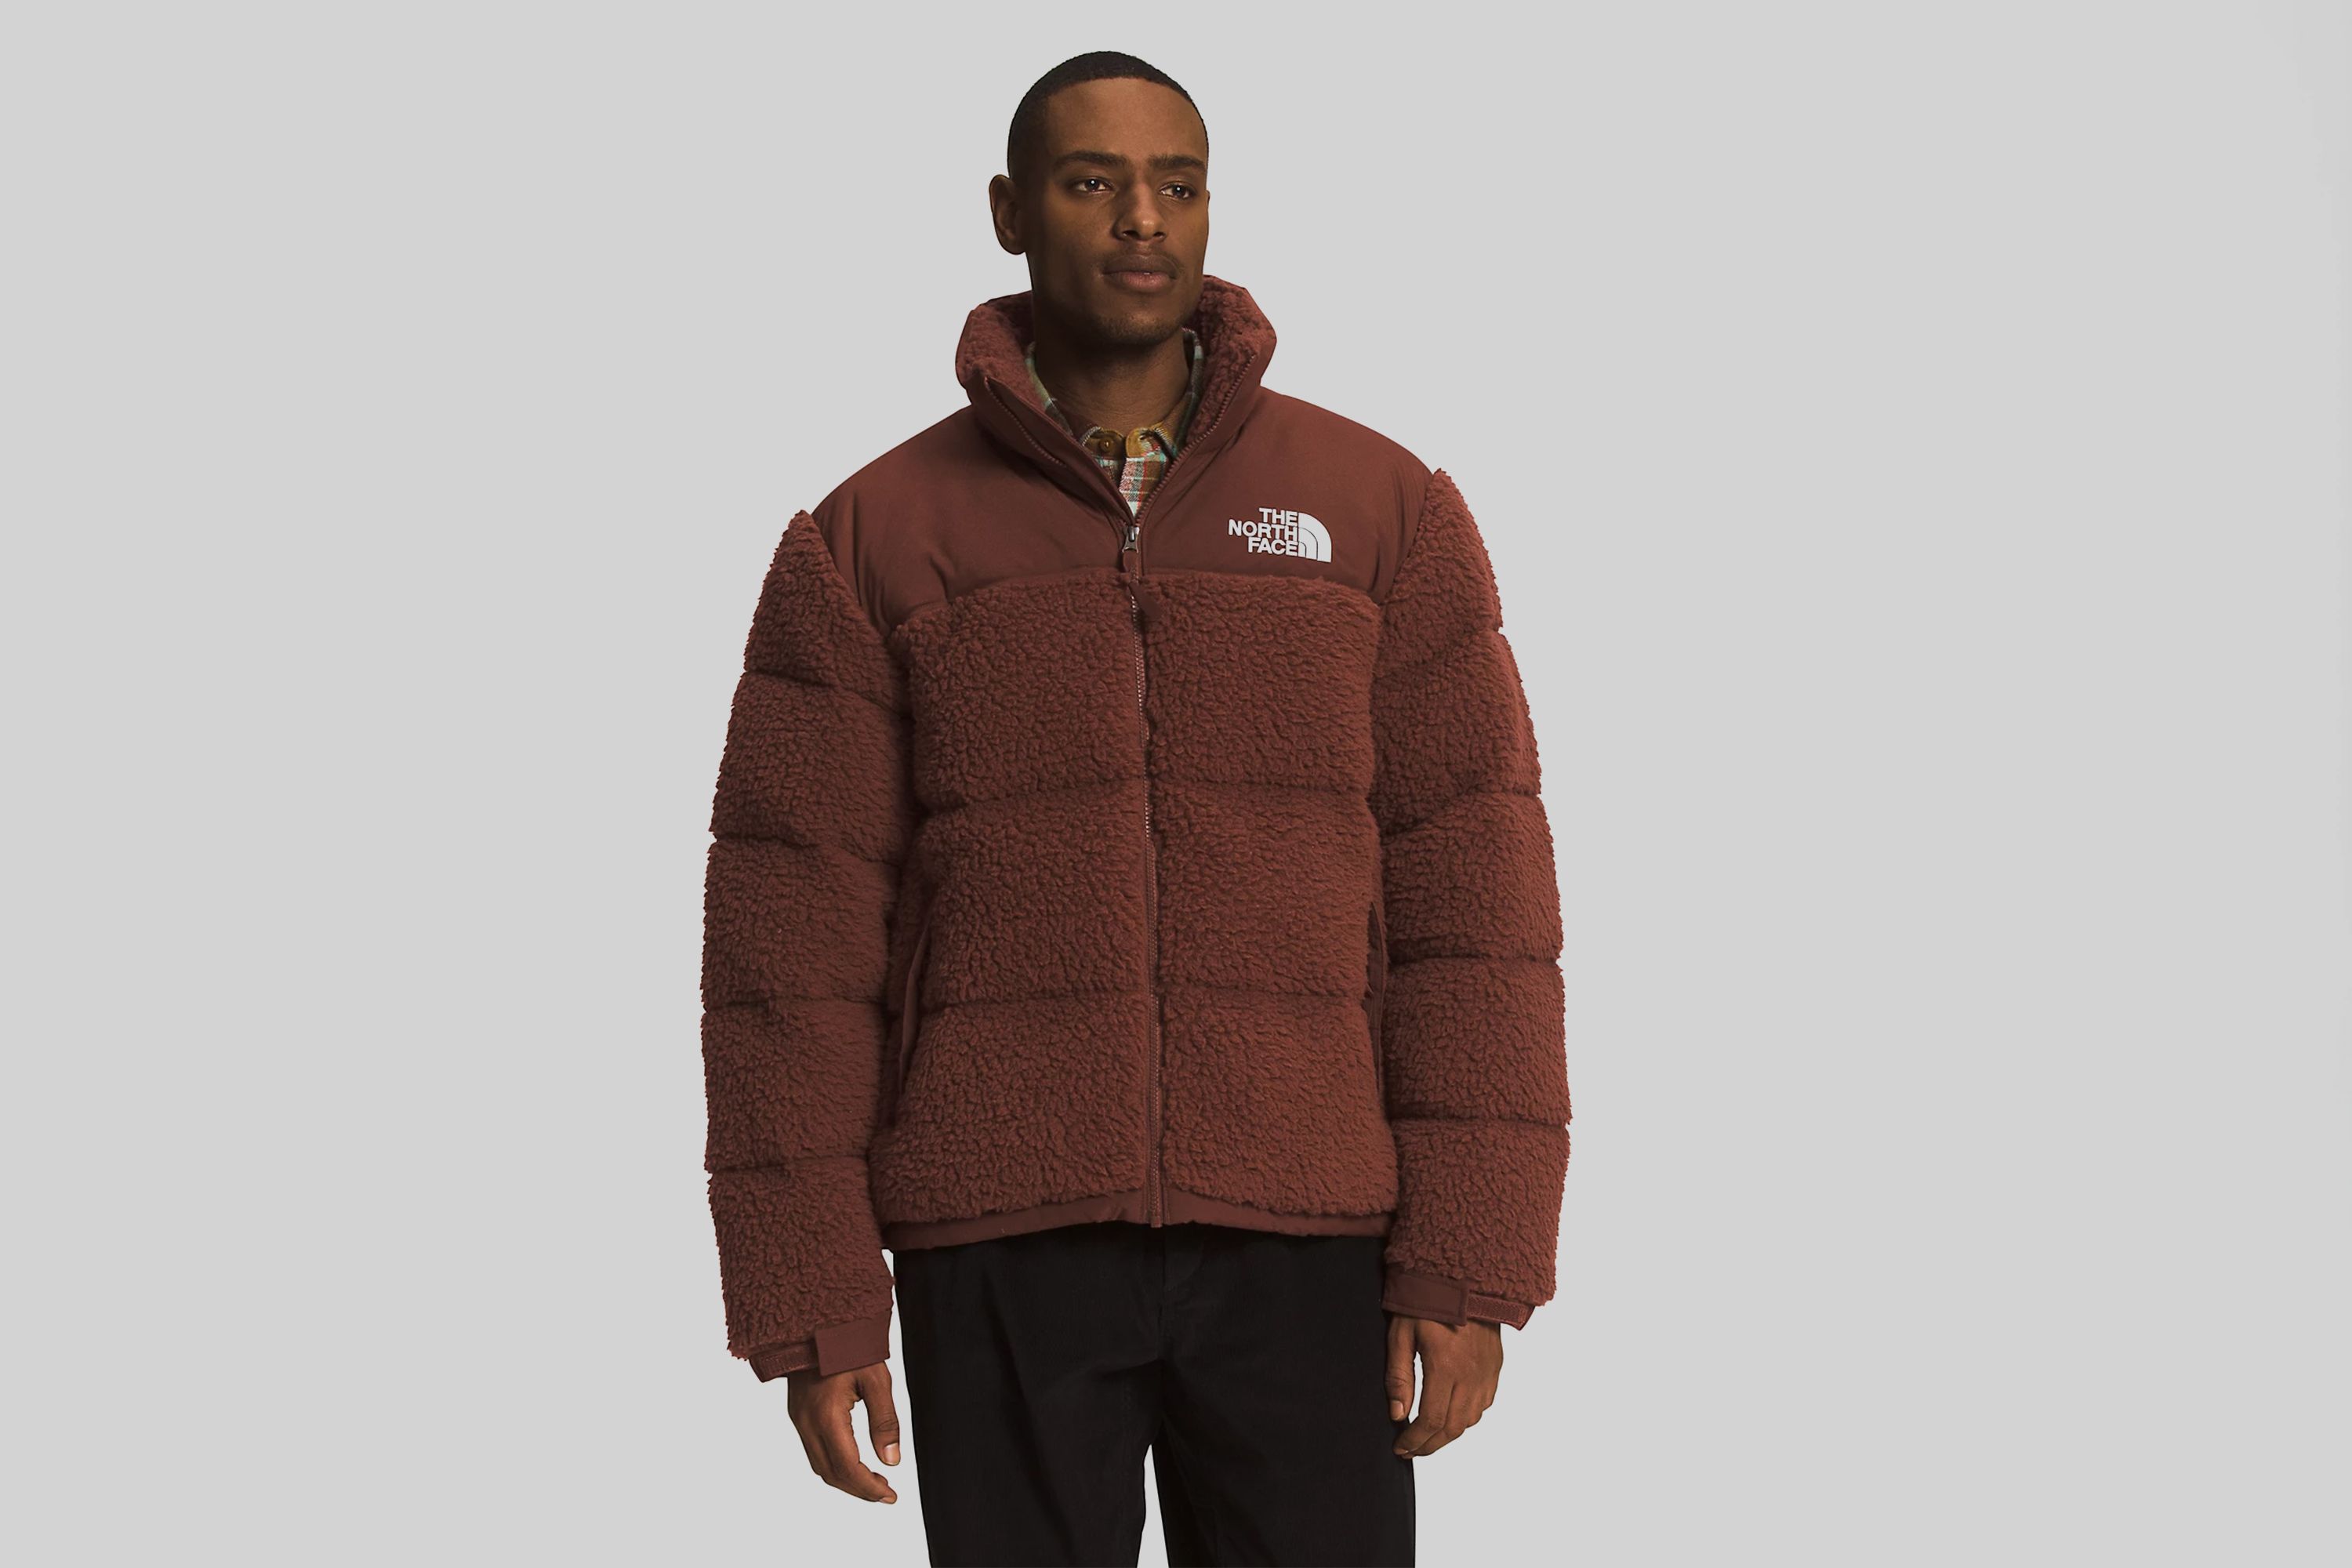 The North Face's Nuptse Jacket Looks Better Than Ever in Fleece